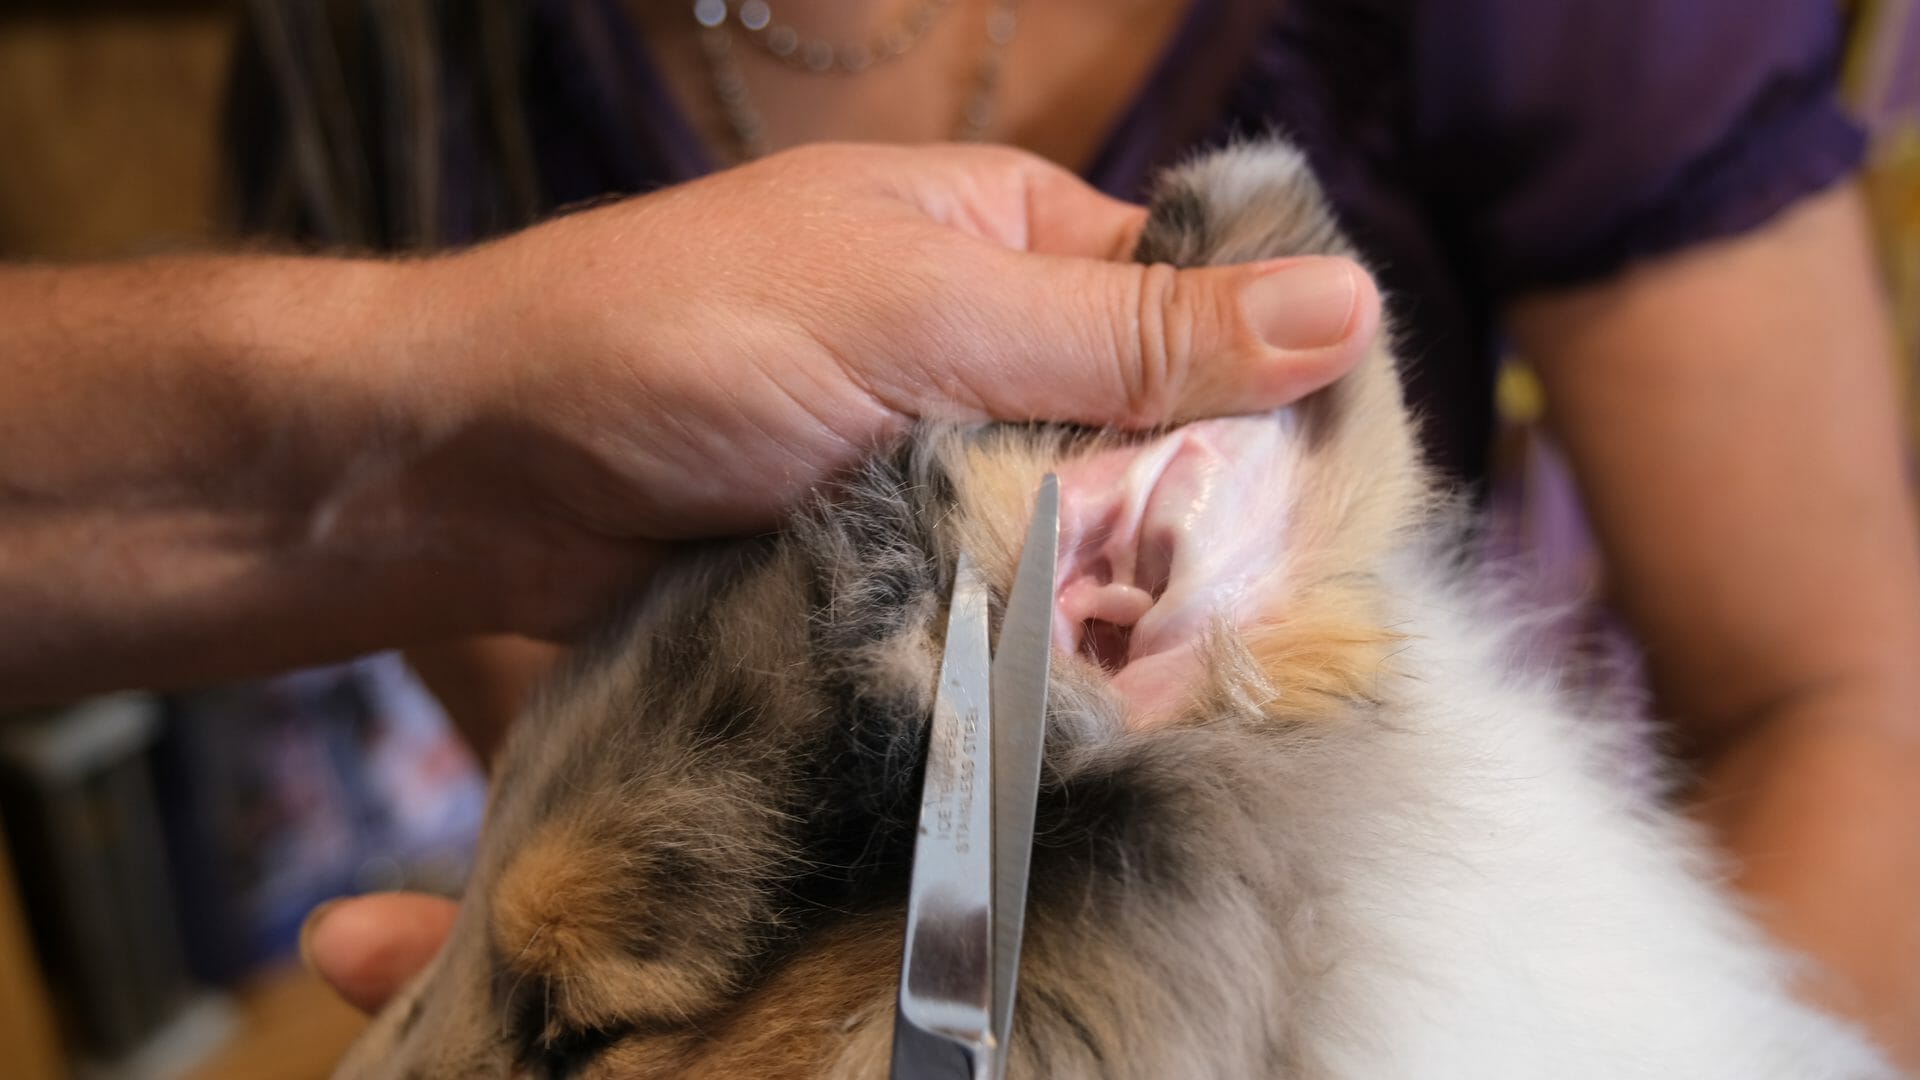 Trimming hair in Collie puppy ear